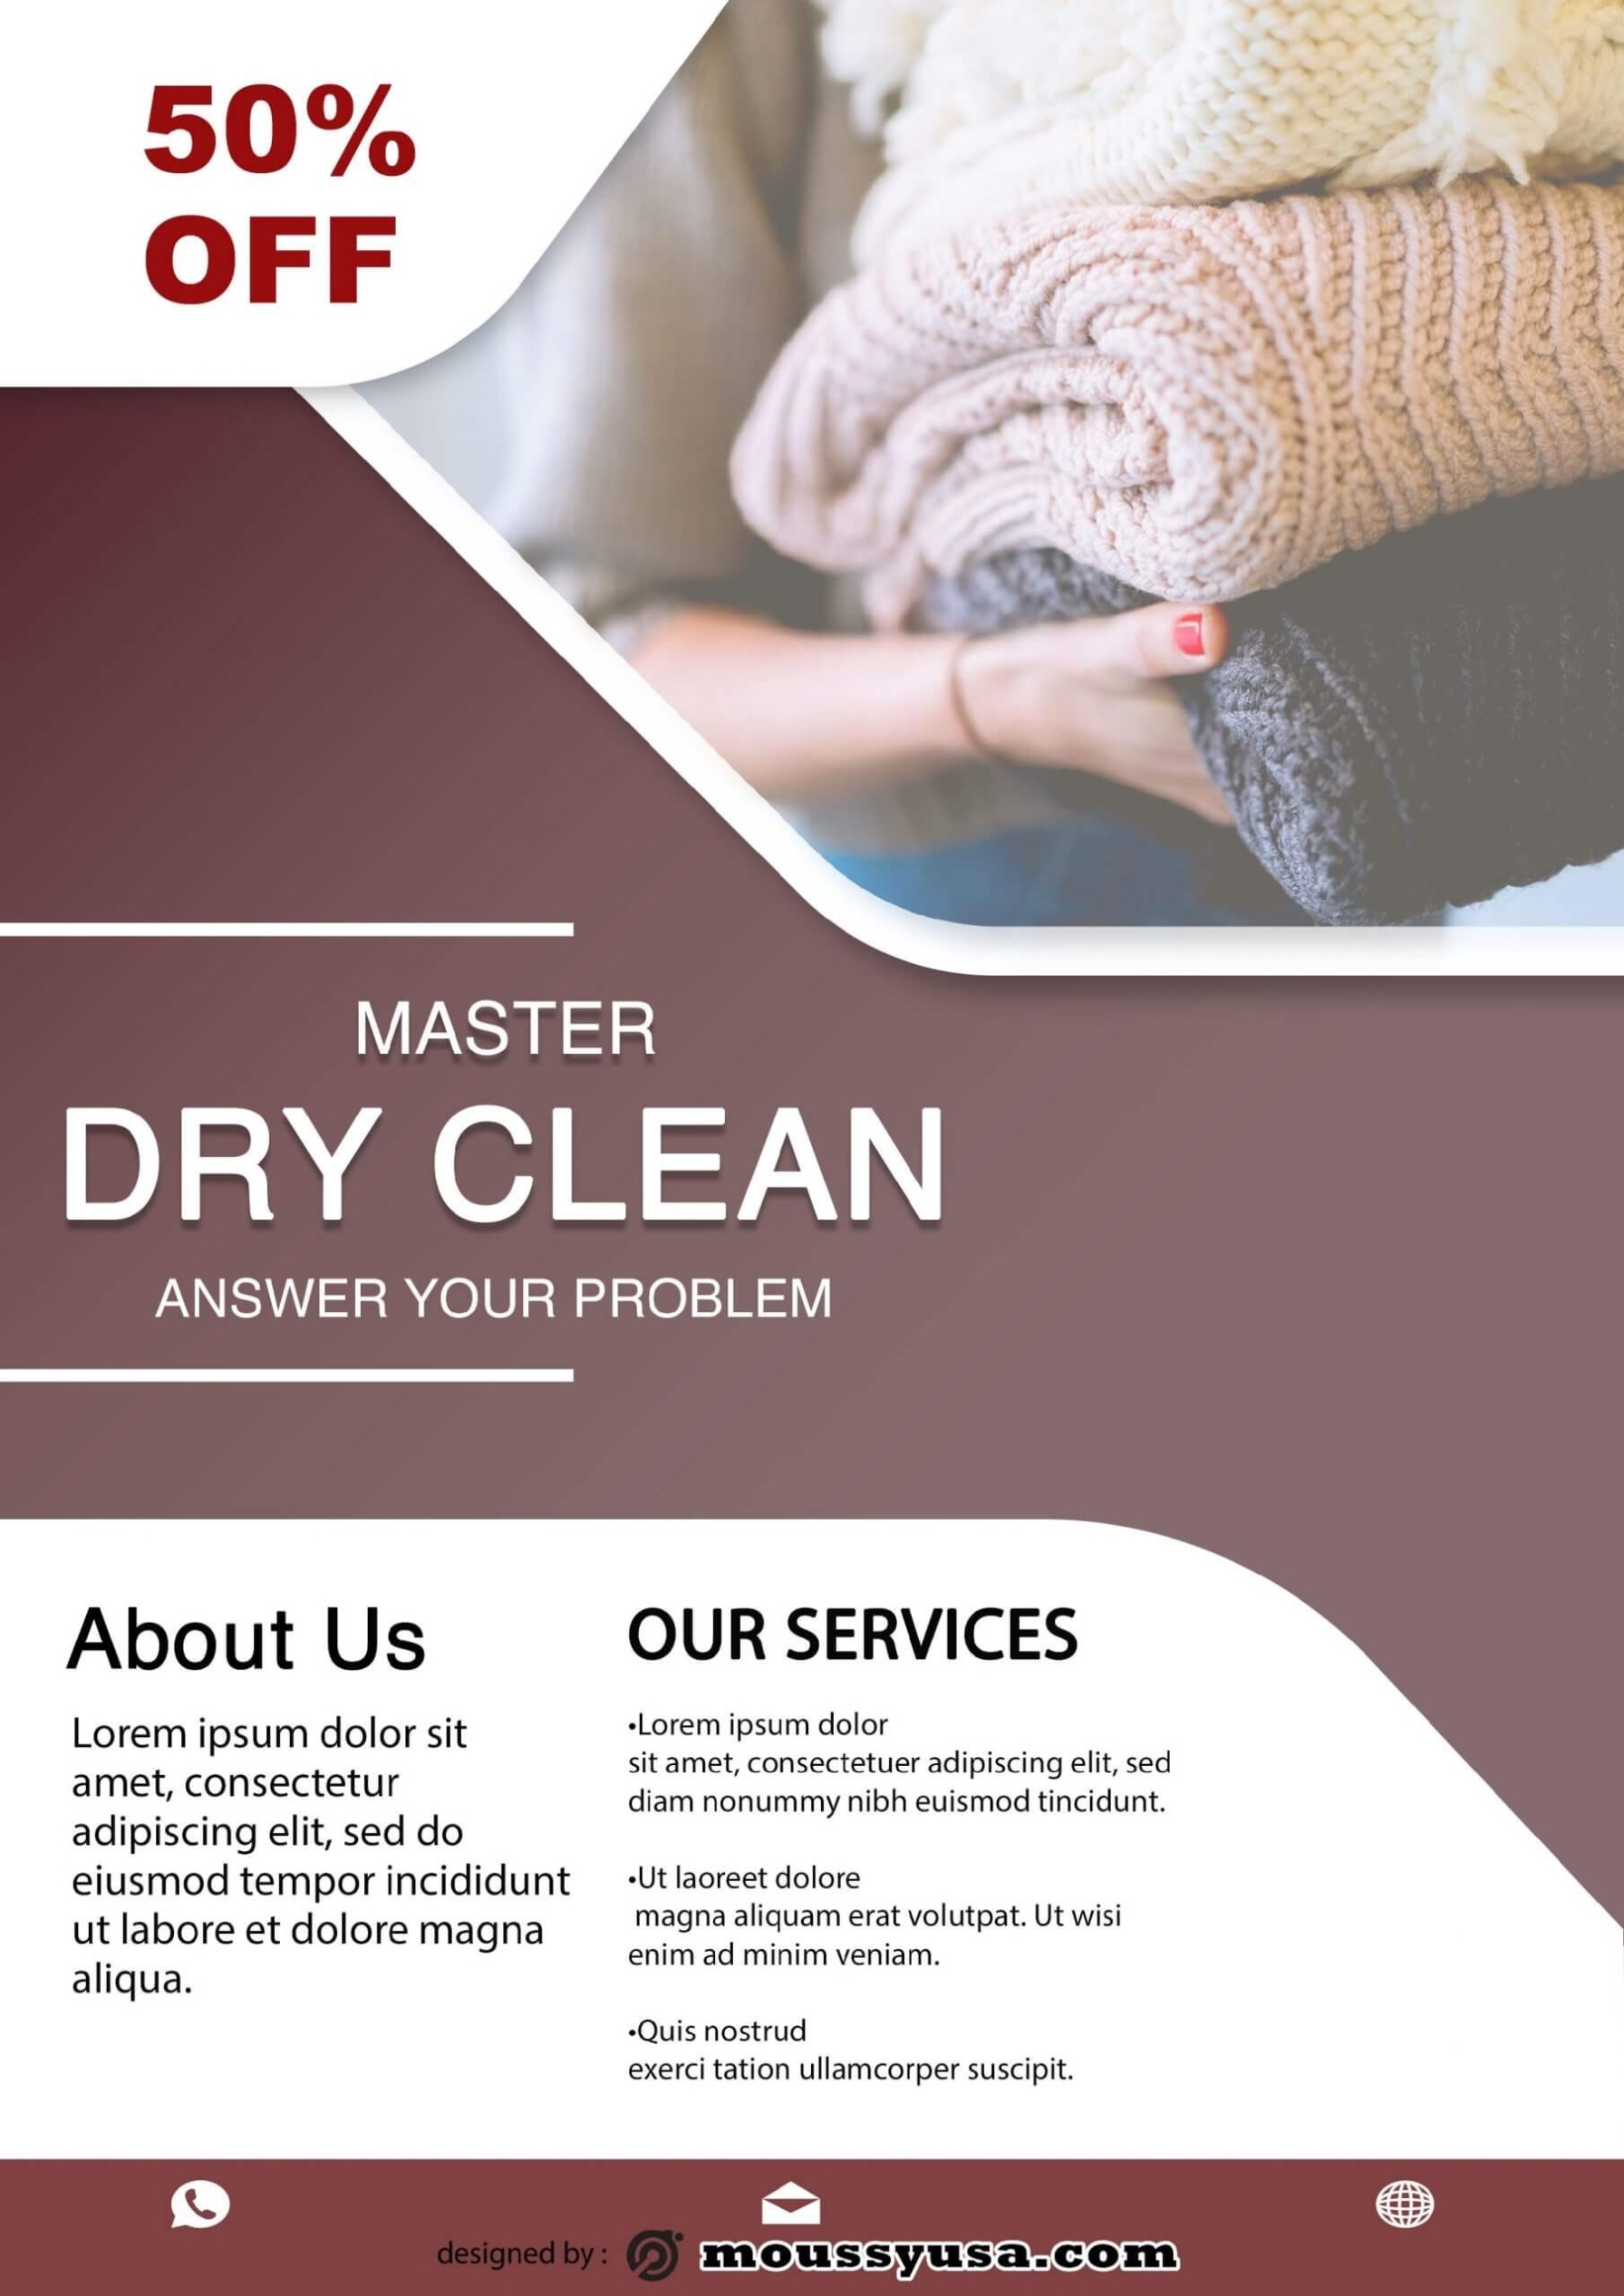 Dry Cleaning Flyer Example Psd Design | Mous Syusa throughout Flyers For Cleaning Business Templates